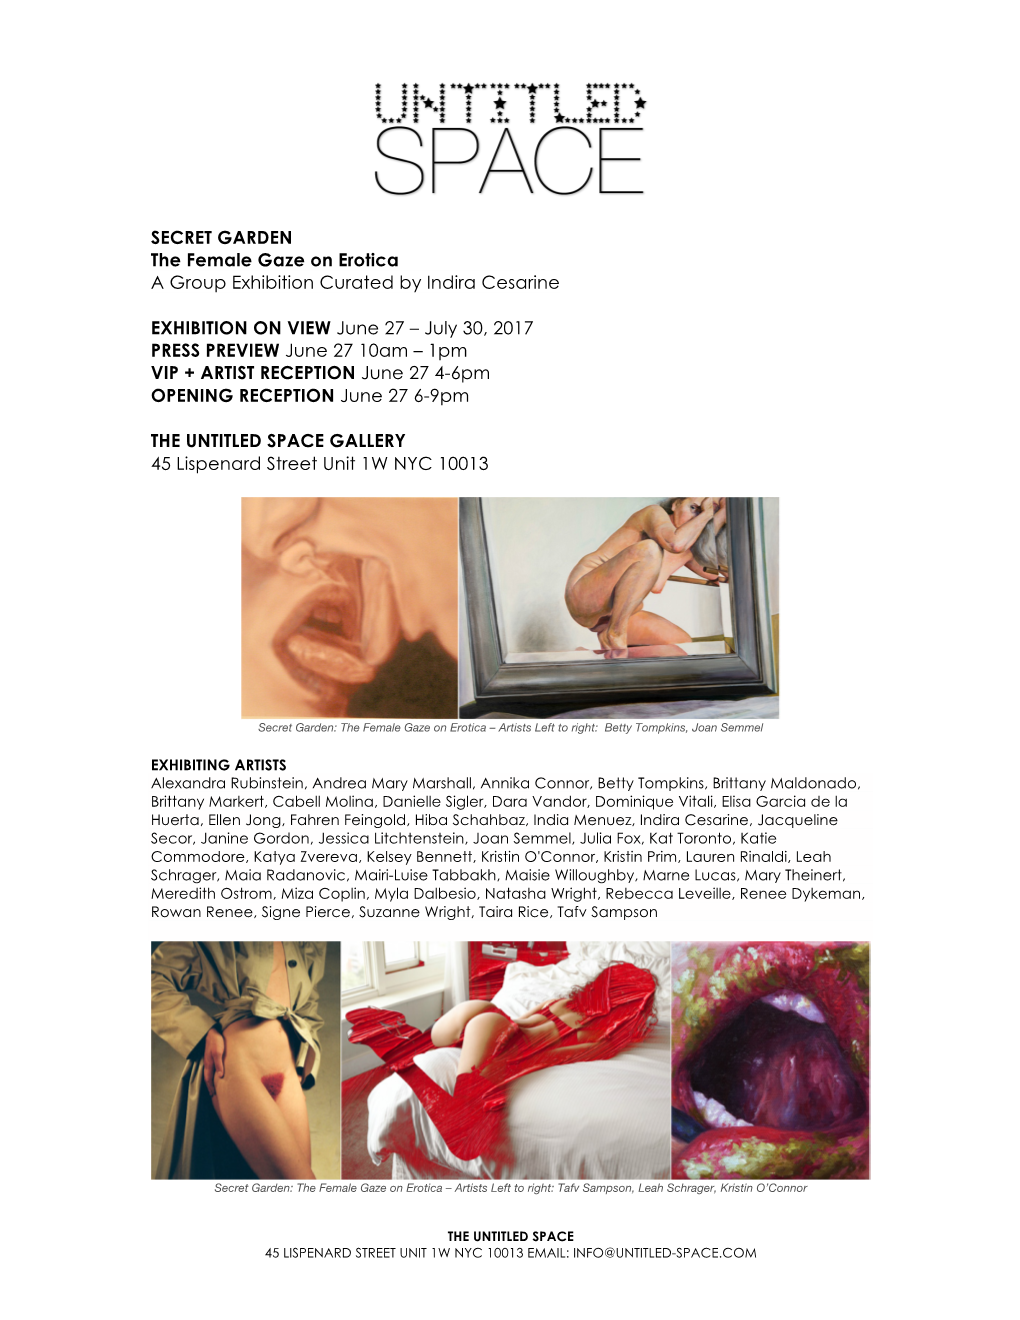 SECRET GARDEN the Female Gaze on Erotica a Group Exhibition Curated by Indira Cesarine